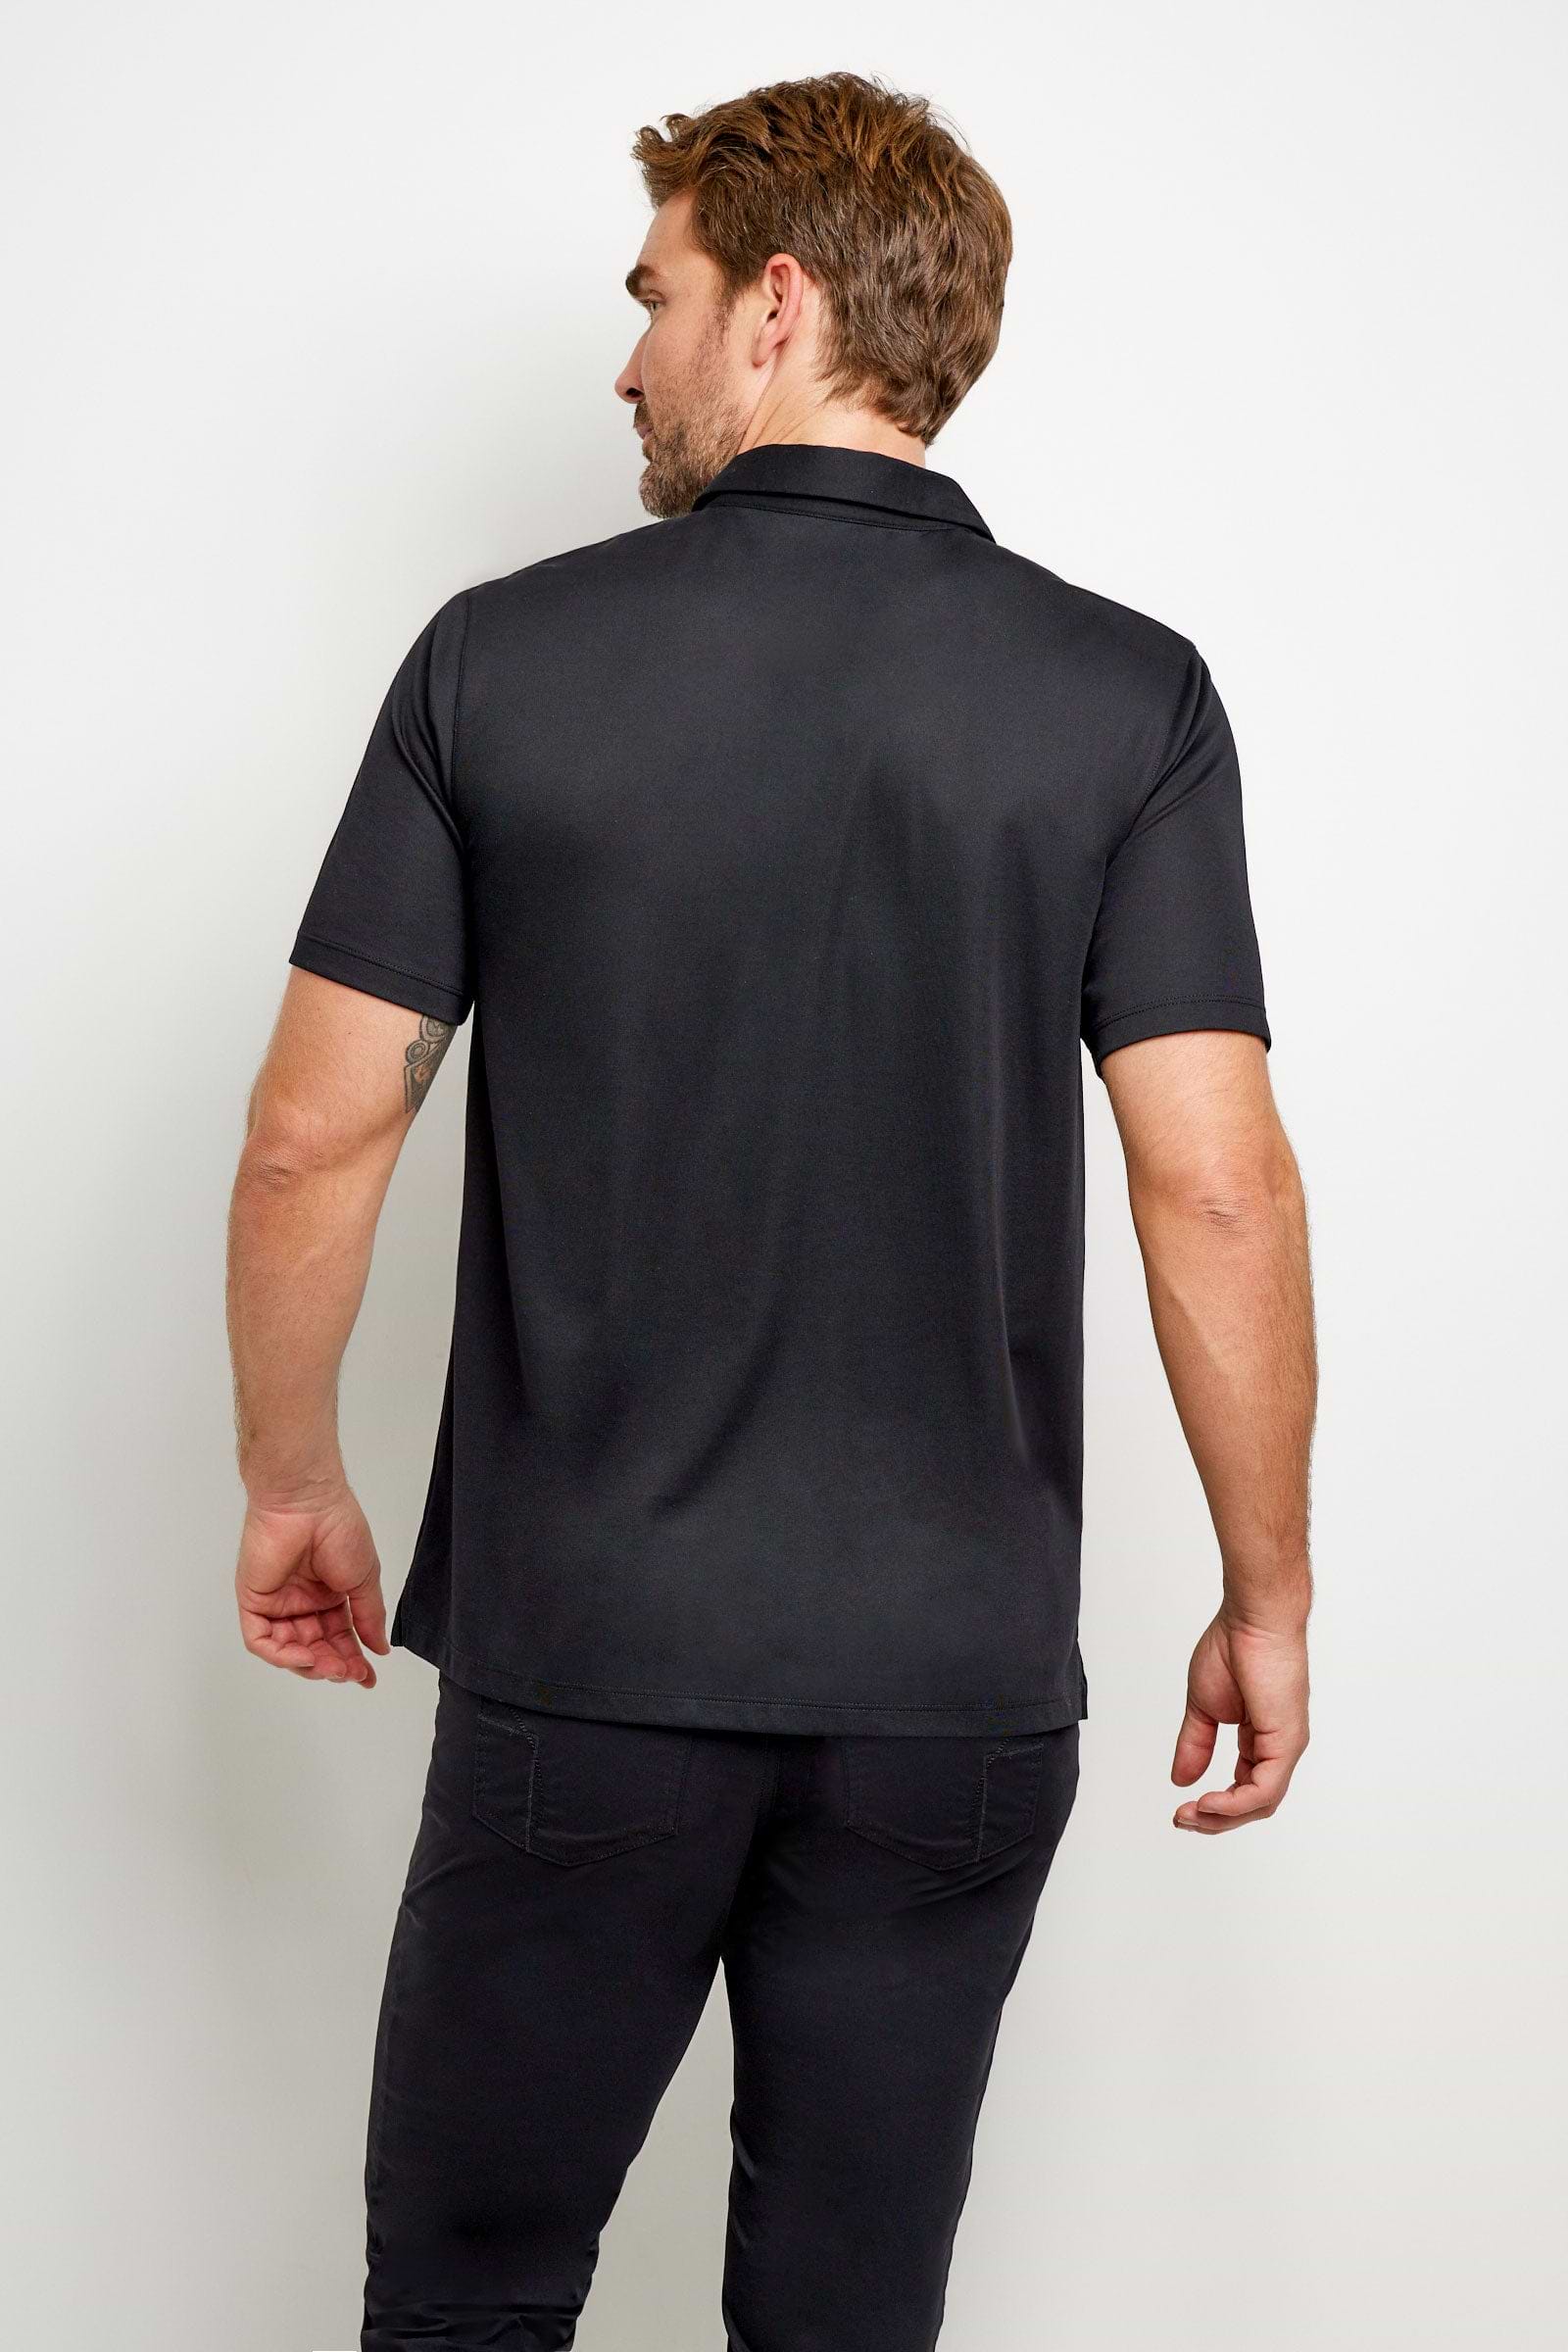 The Best Travel Top. Man Showing the Back Profile of a Men's Ryan Polo in Black.